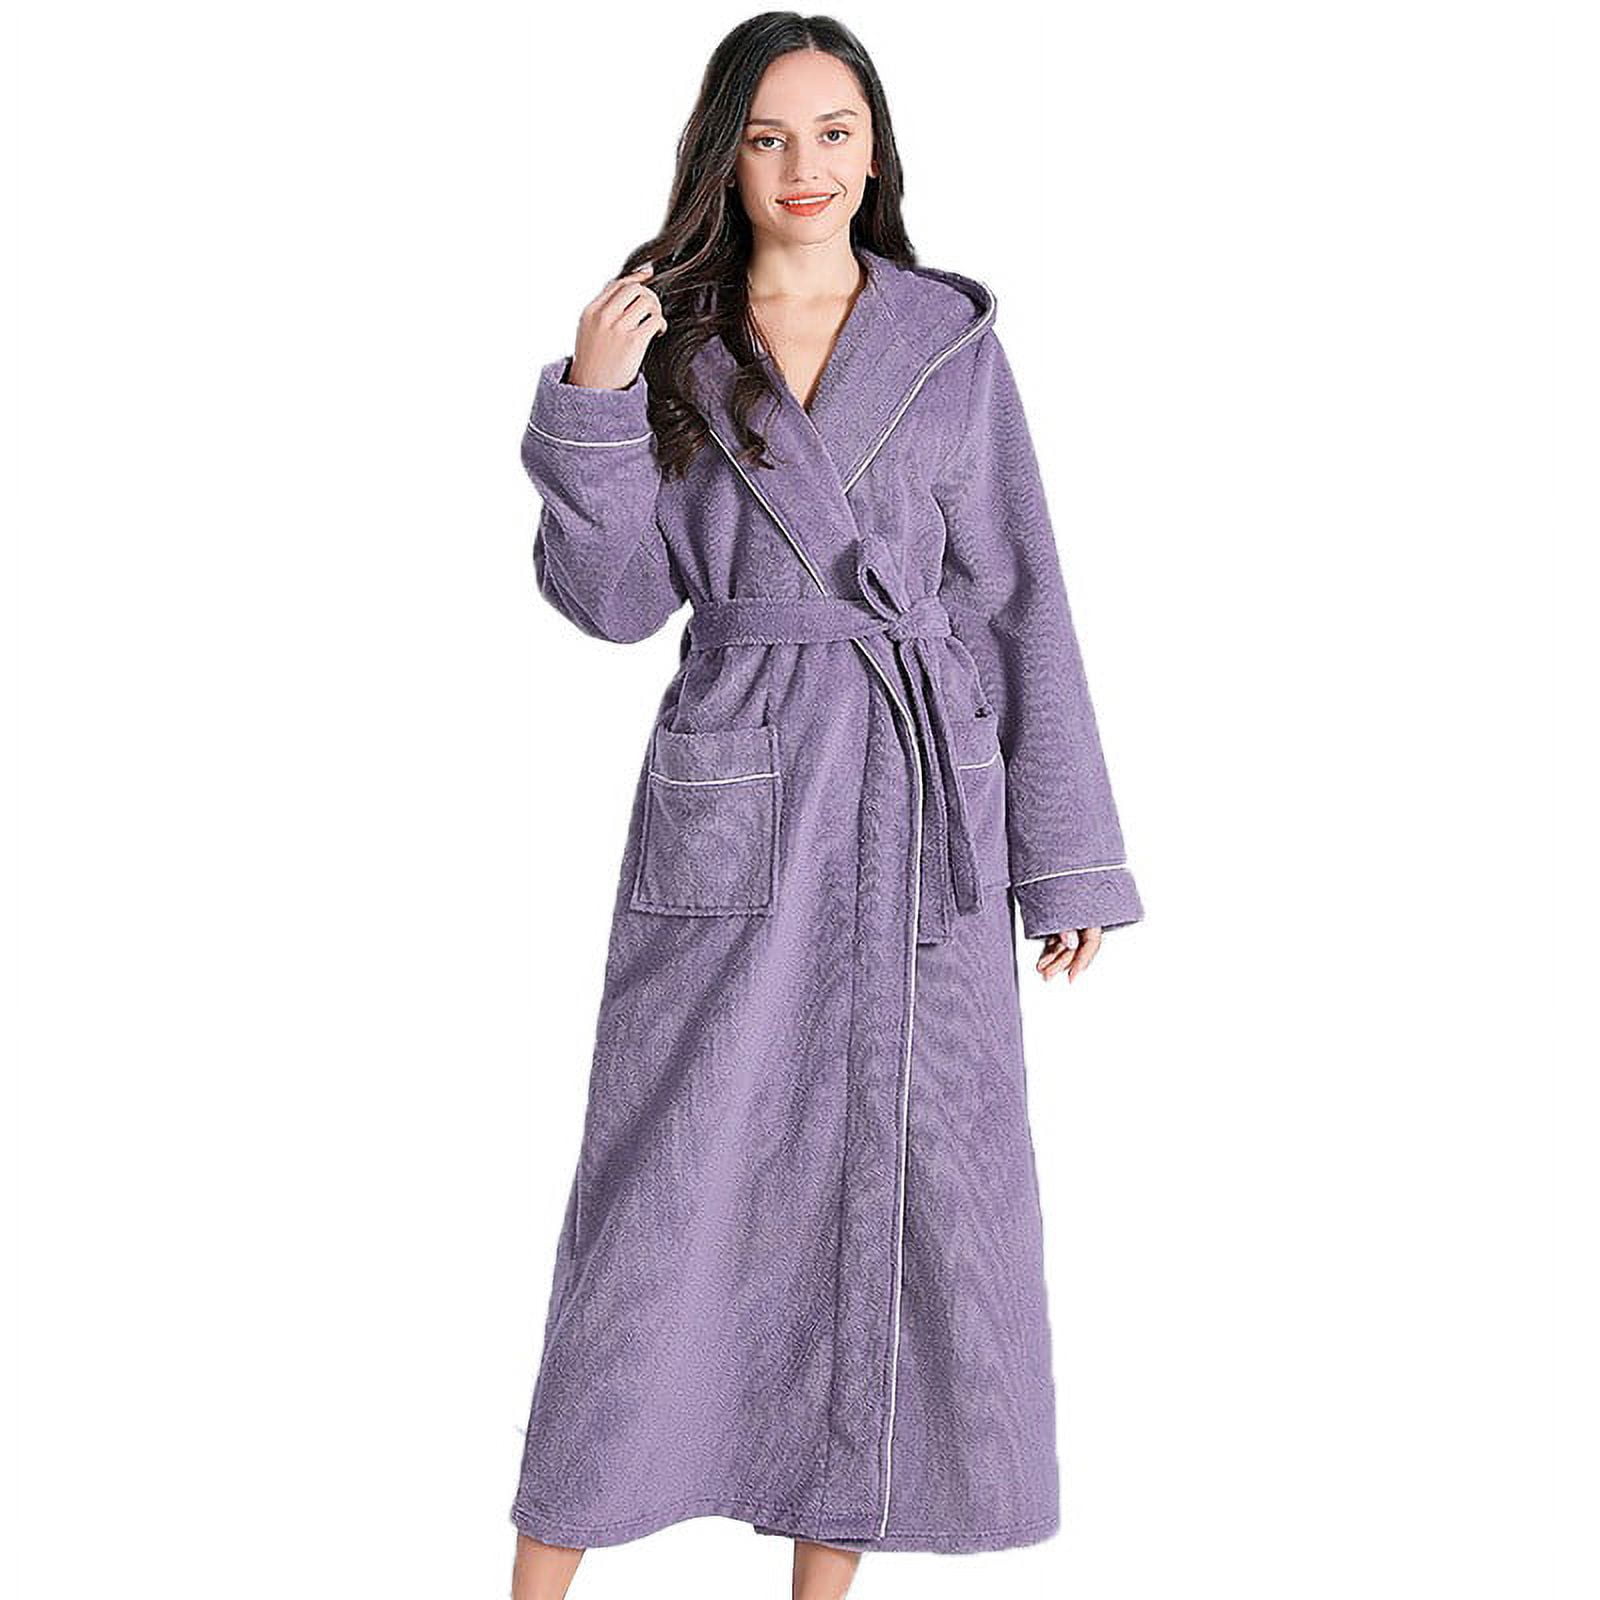 sunongvt Long Dressing Gowns for Men,Super Warm And Cozy Luxury Fleece  Thick Men's Nightwear Robe Bathrobe for Winter,Blue,3XL at Amazon Men's  Clothing store